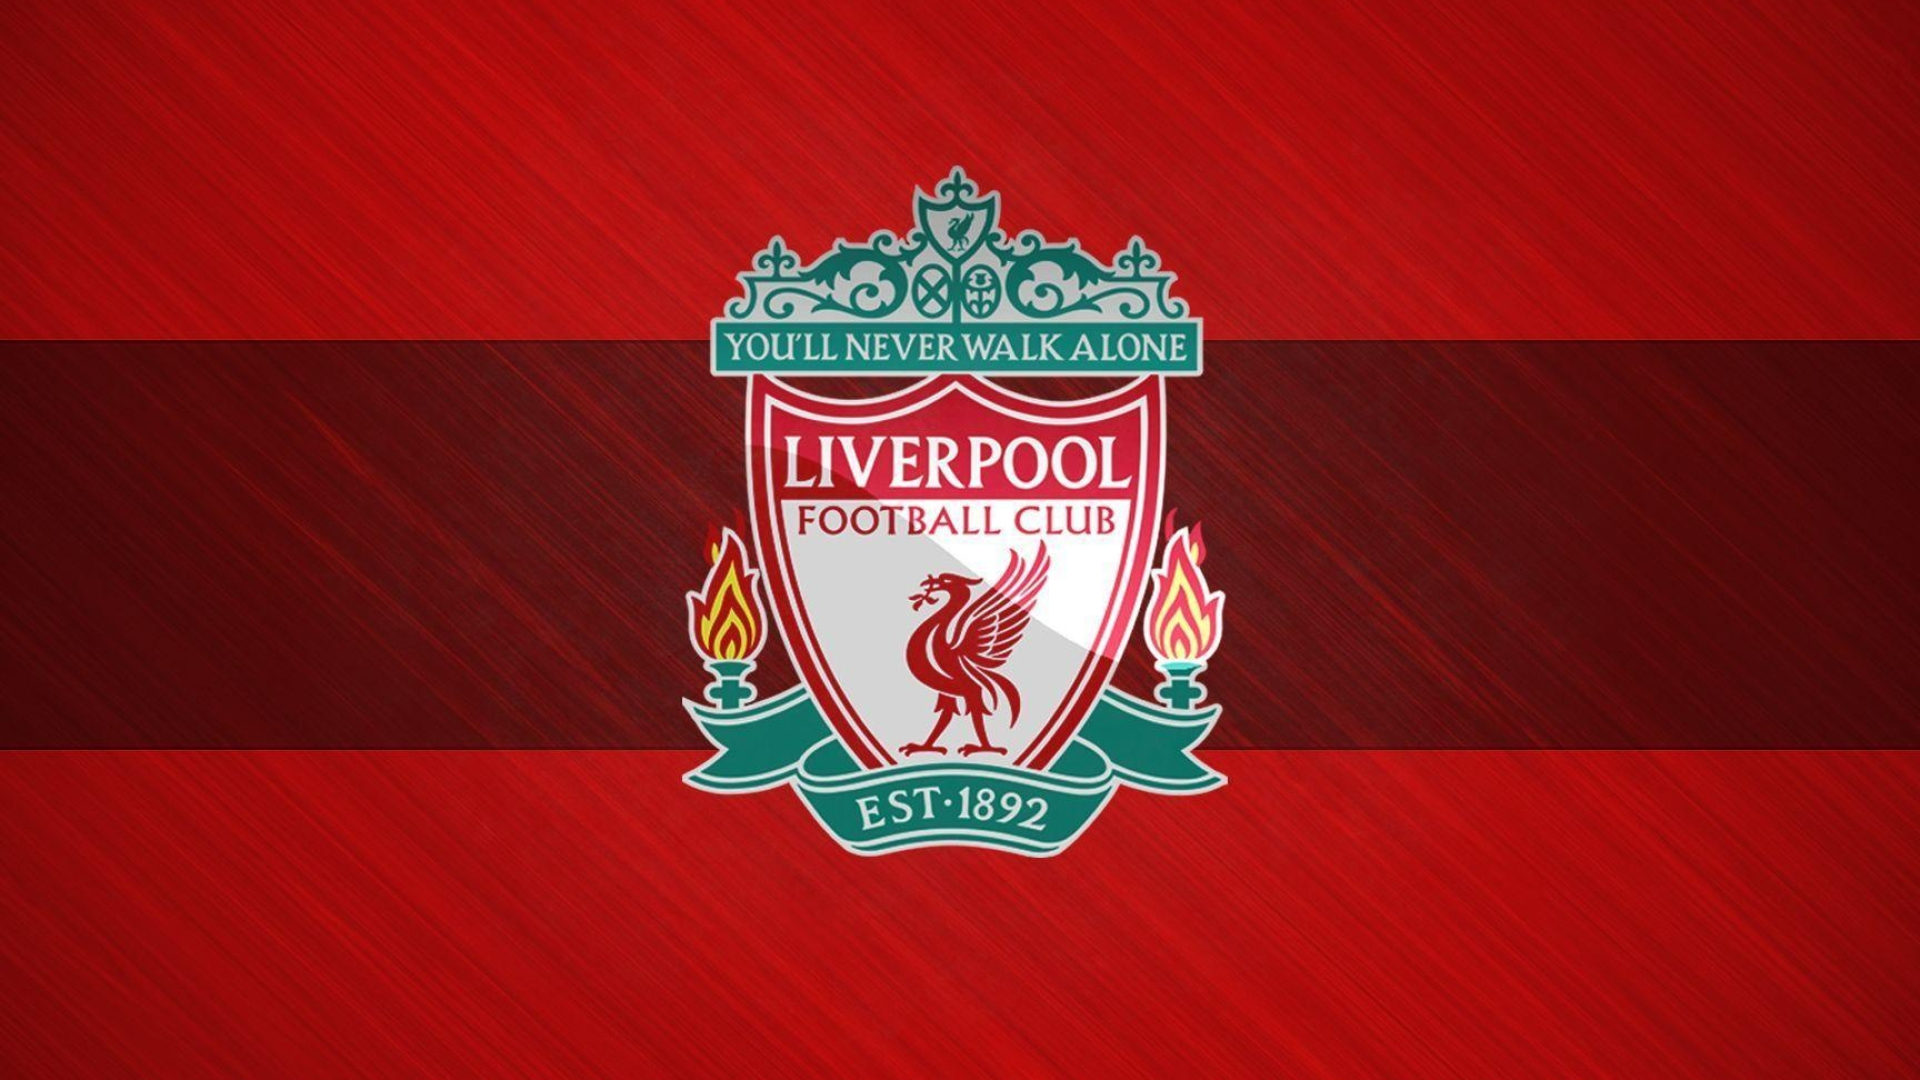 Liverpool Football Club: Soccer team, founded in 1892 as Everton Athletic. 1920x1080 Full HD Background.